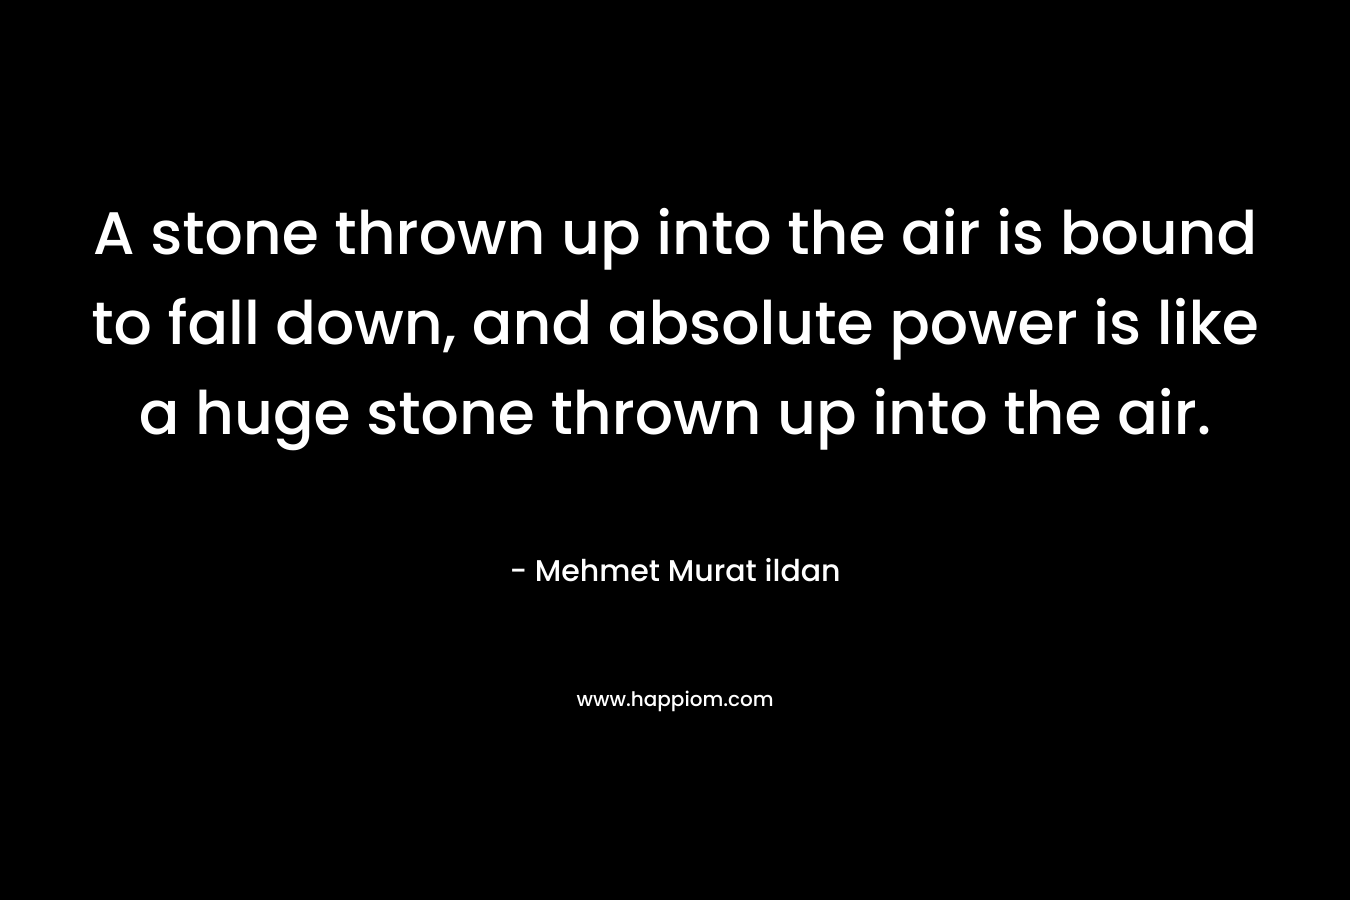 A stone thrown up into the air is bound to fall down, and absolute power is like a huge stone thrown up into the air.